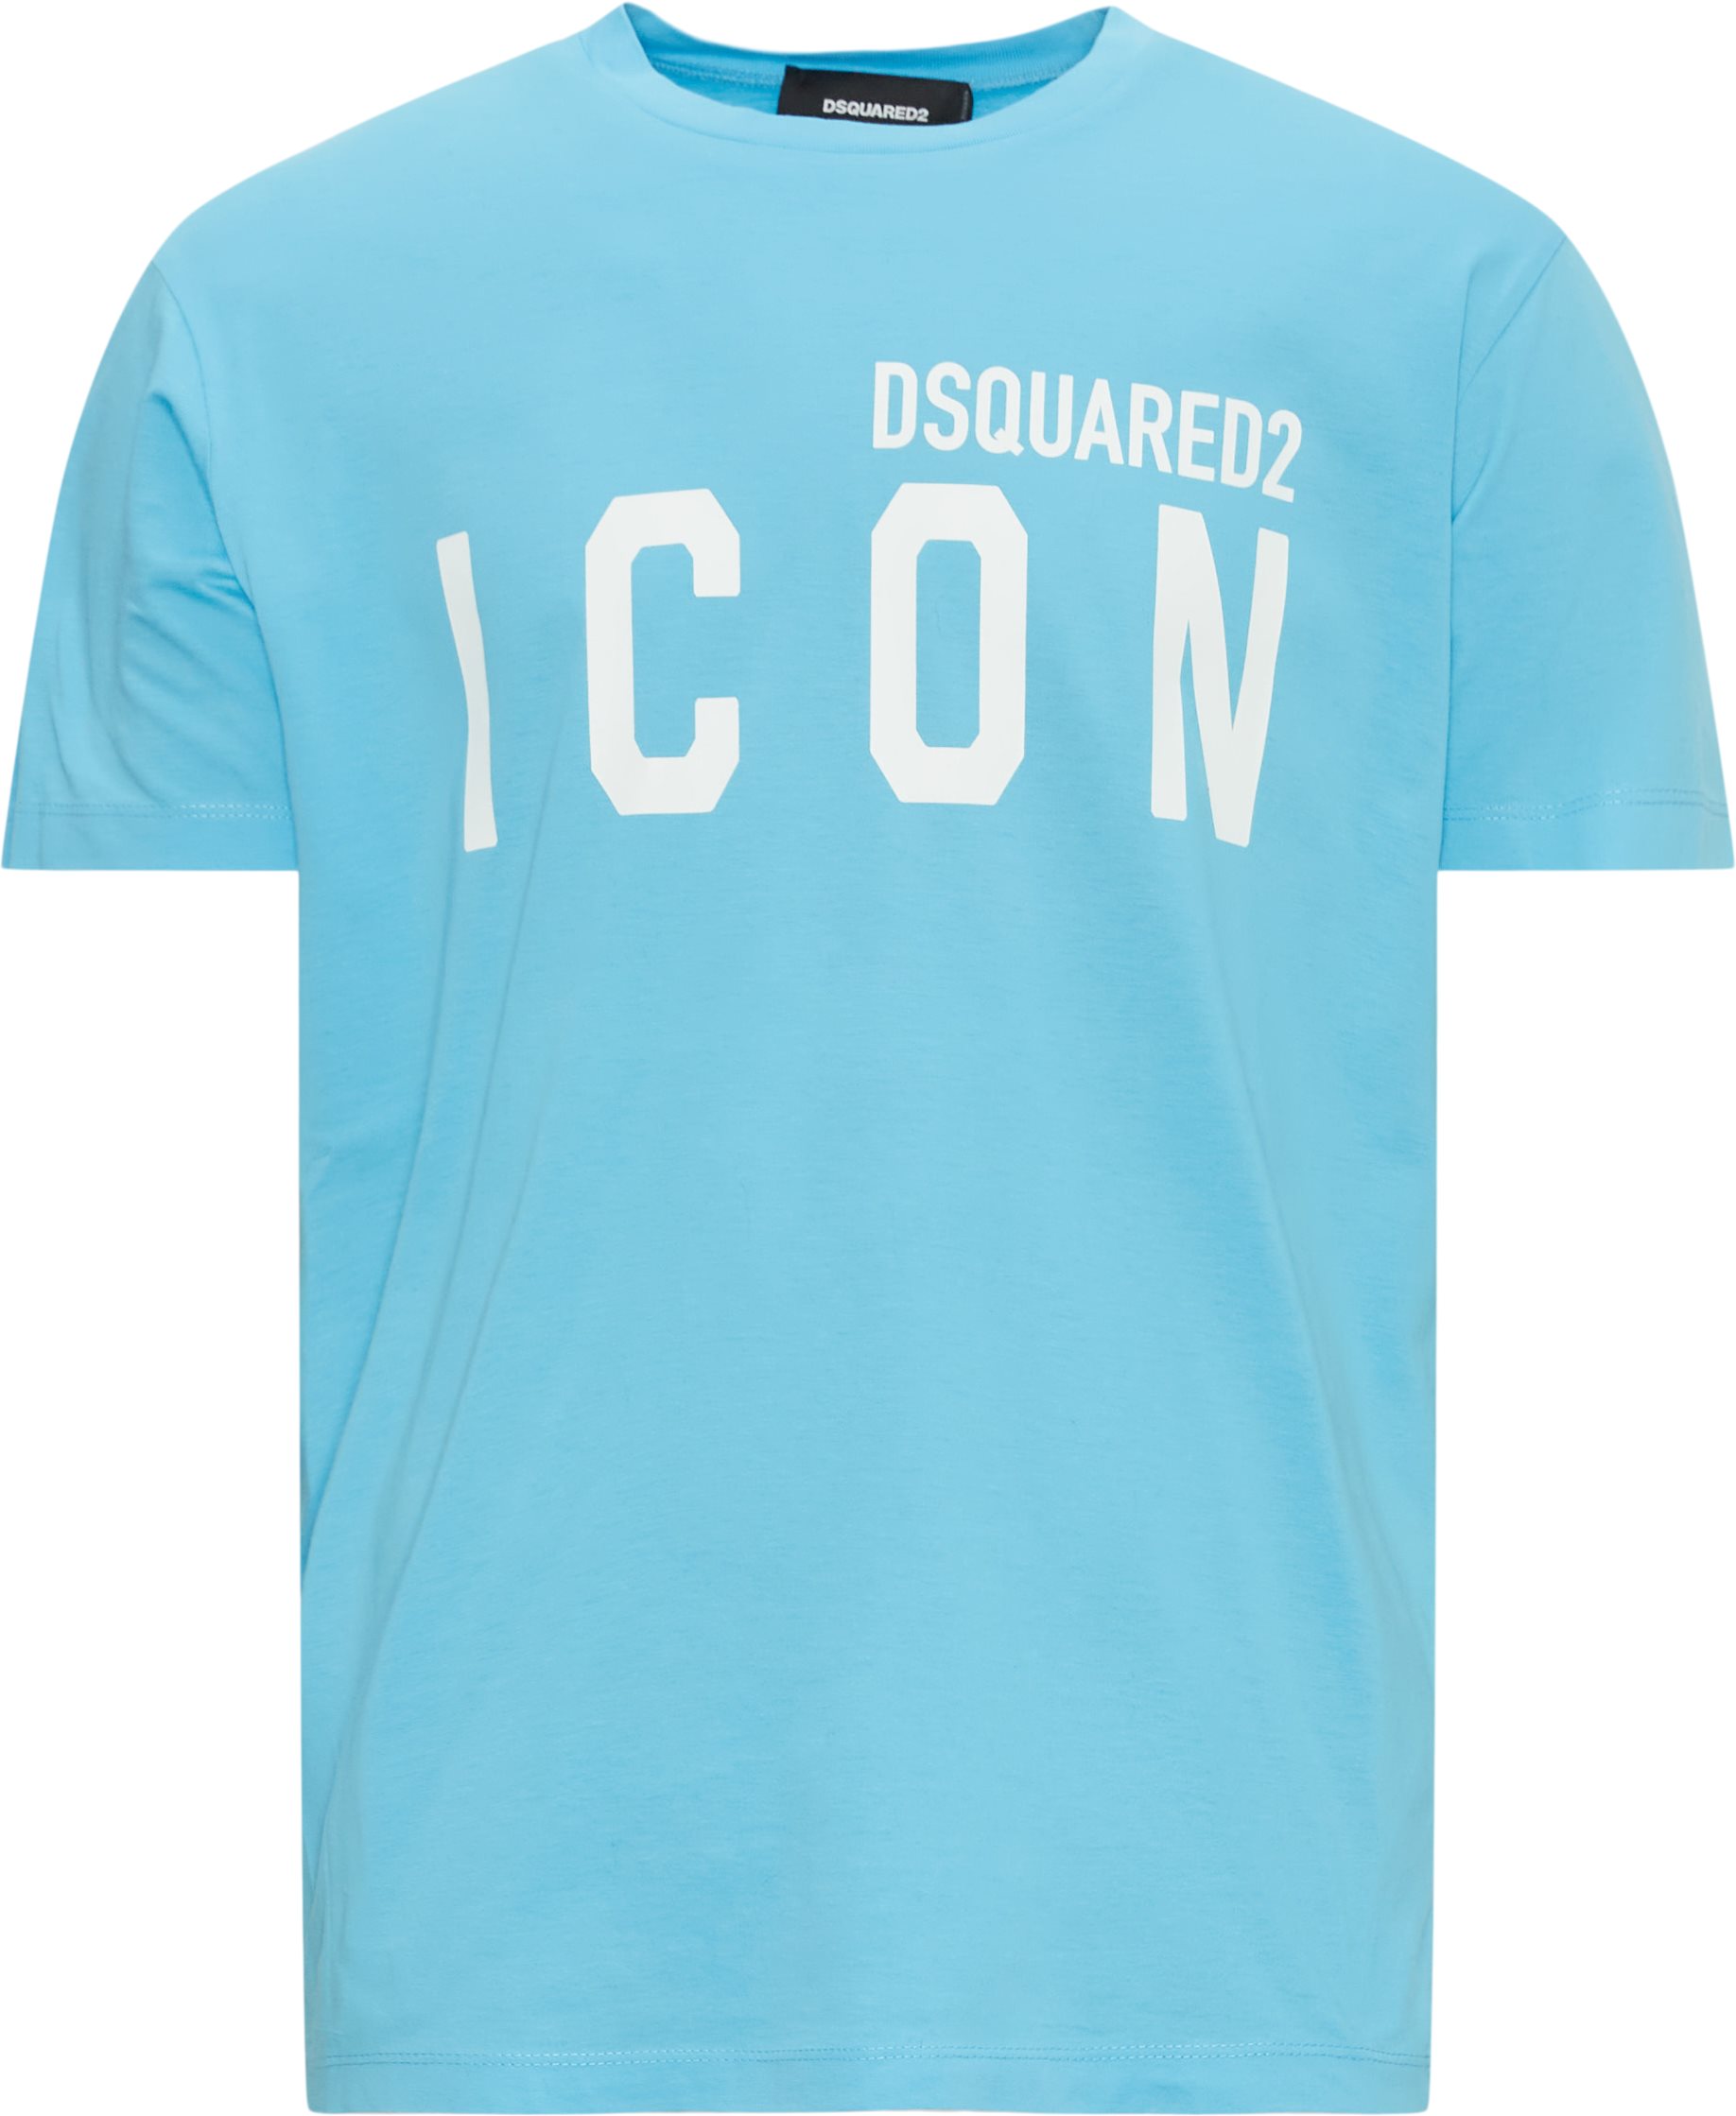 Dsquared2 T-shirts S79GC0003 S23009 ICON Blue